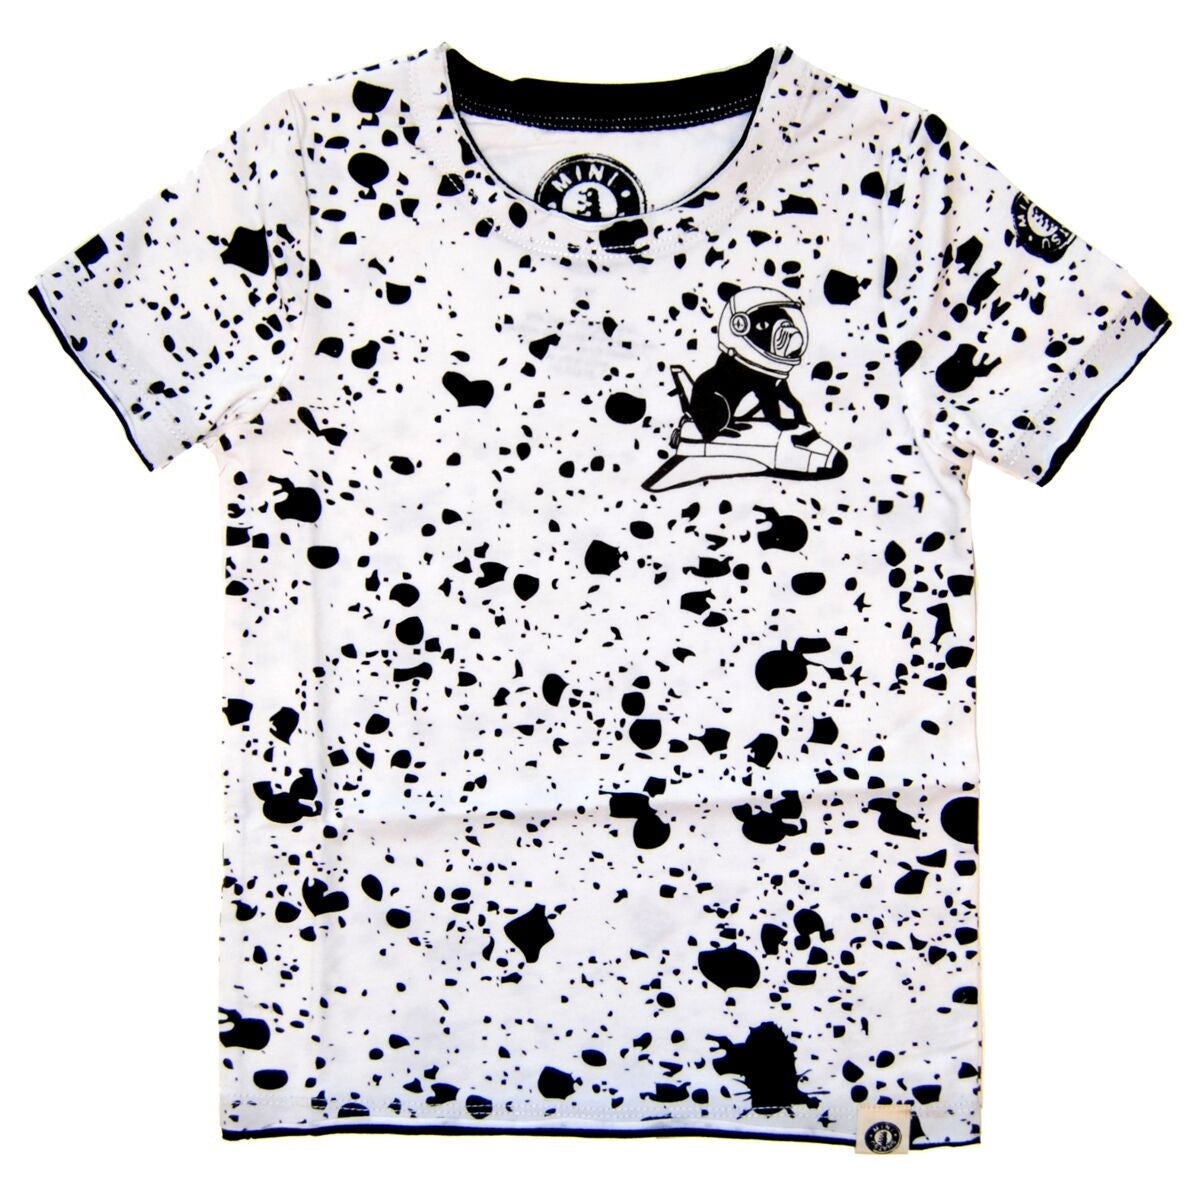 outer space splatter tee